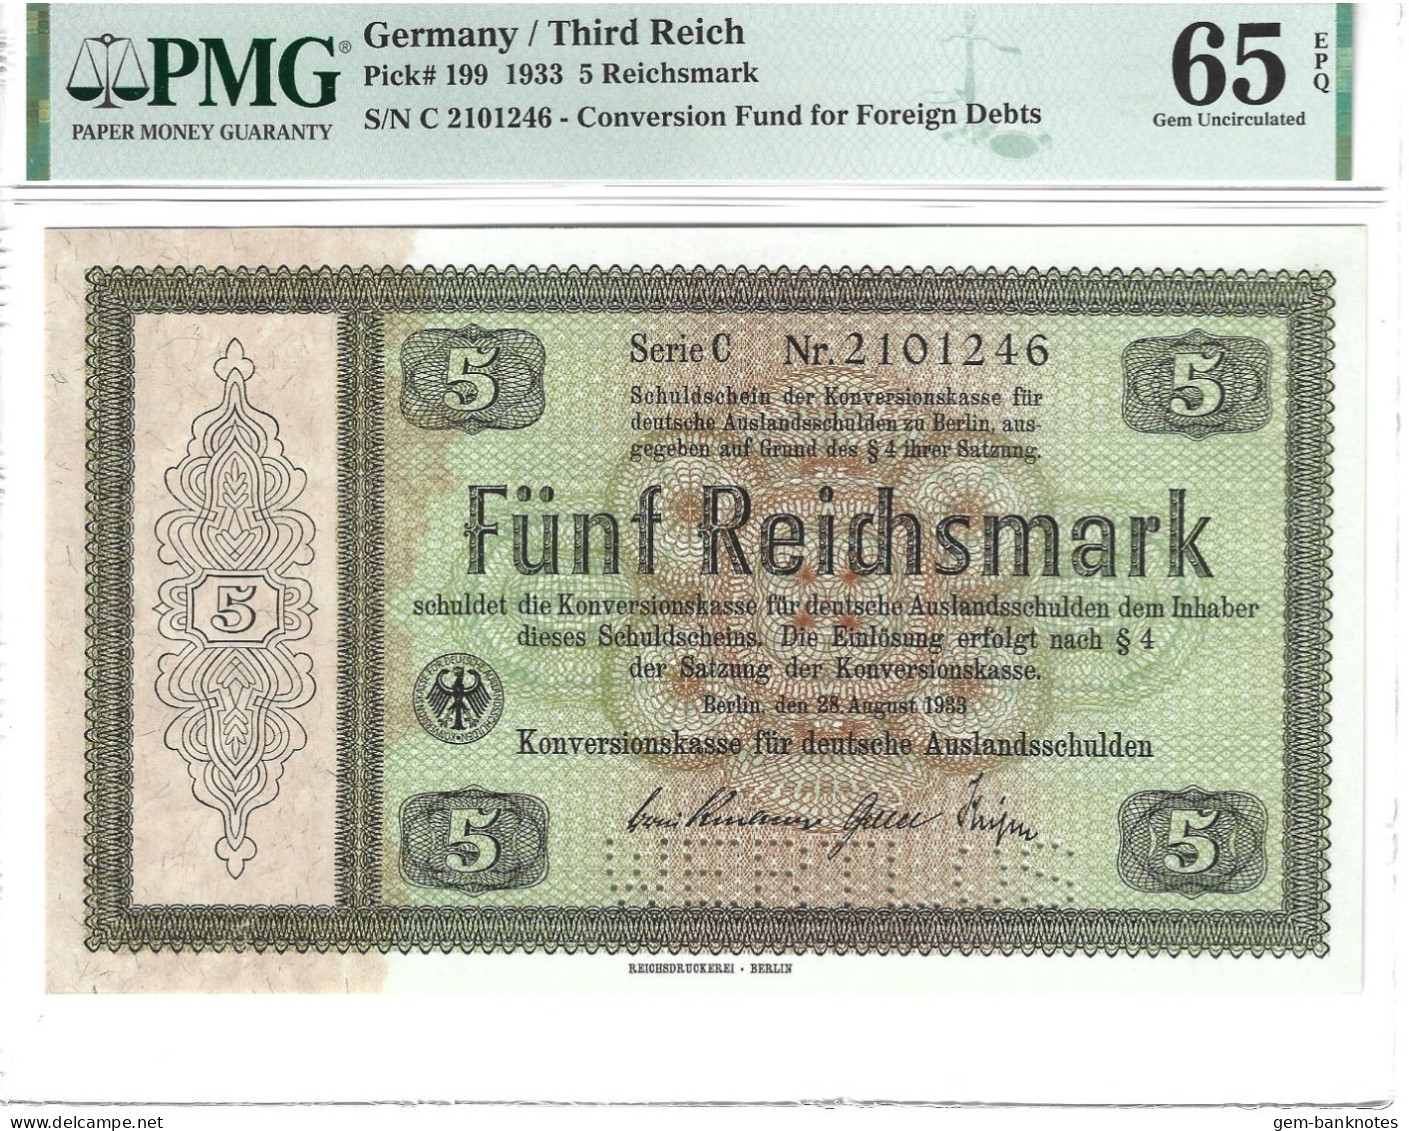 Germany 5 Reichsmark 1933 P199, Perforated, Graded 65 EPQ Gem Uncirculated By PMG - 5 Reichsmark